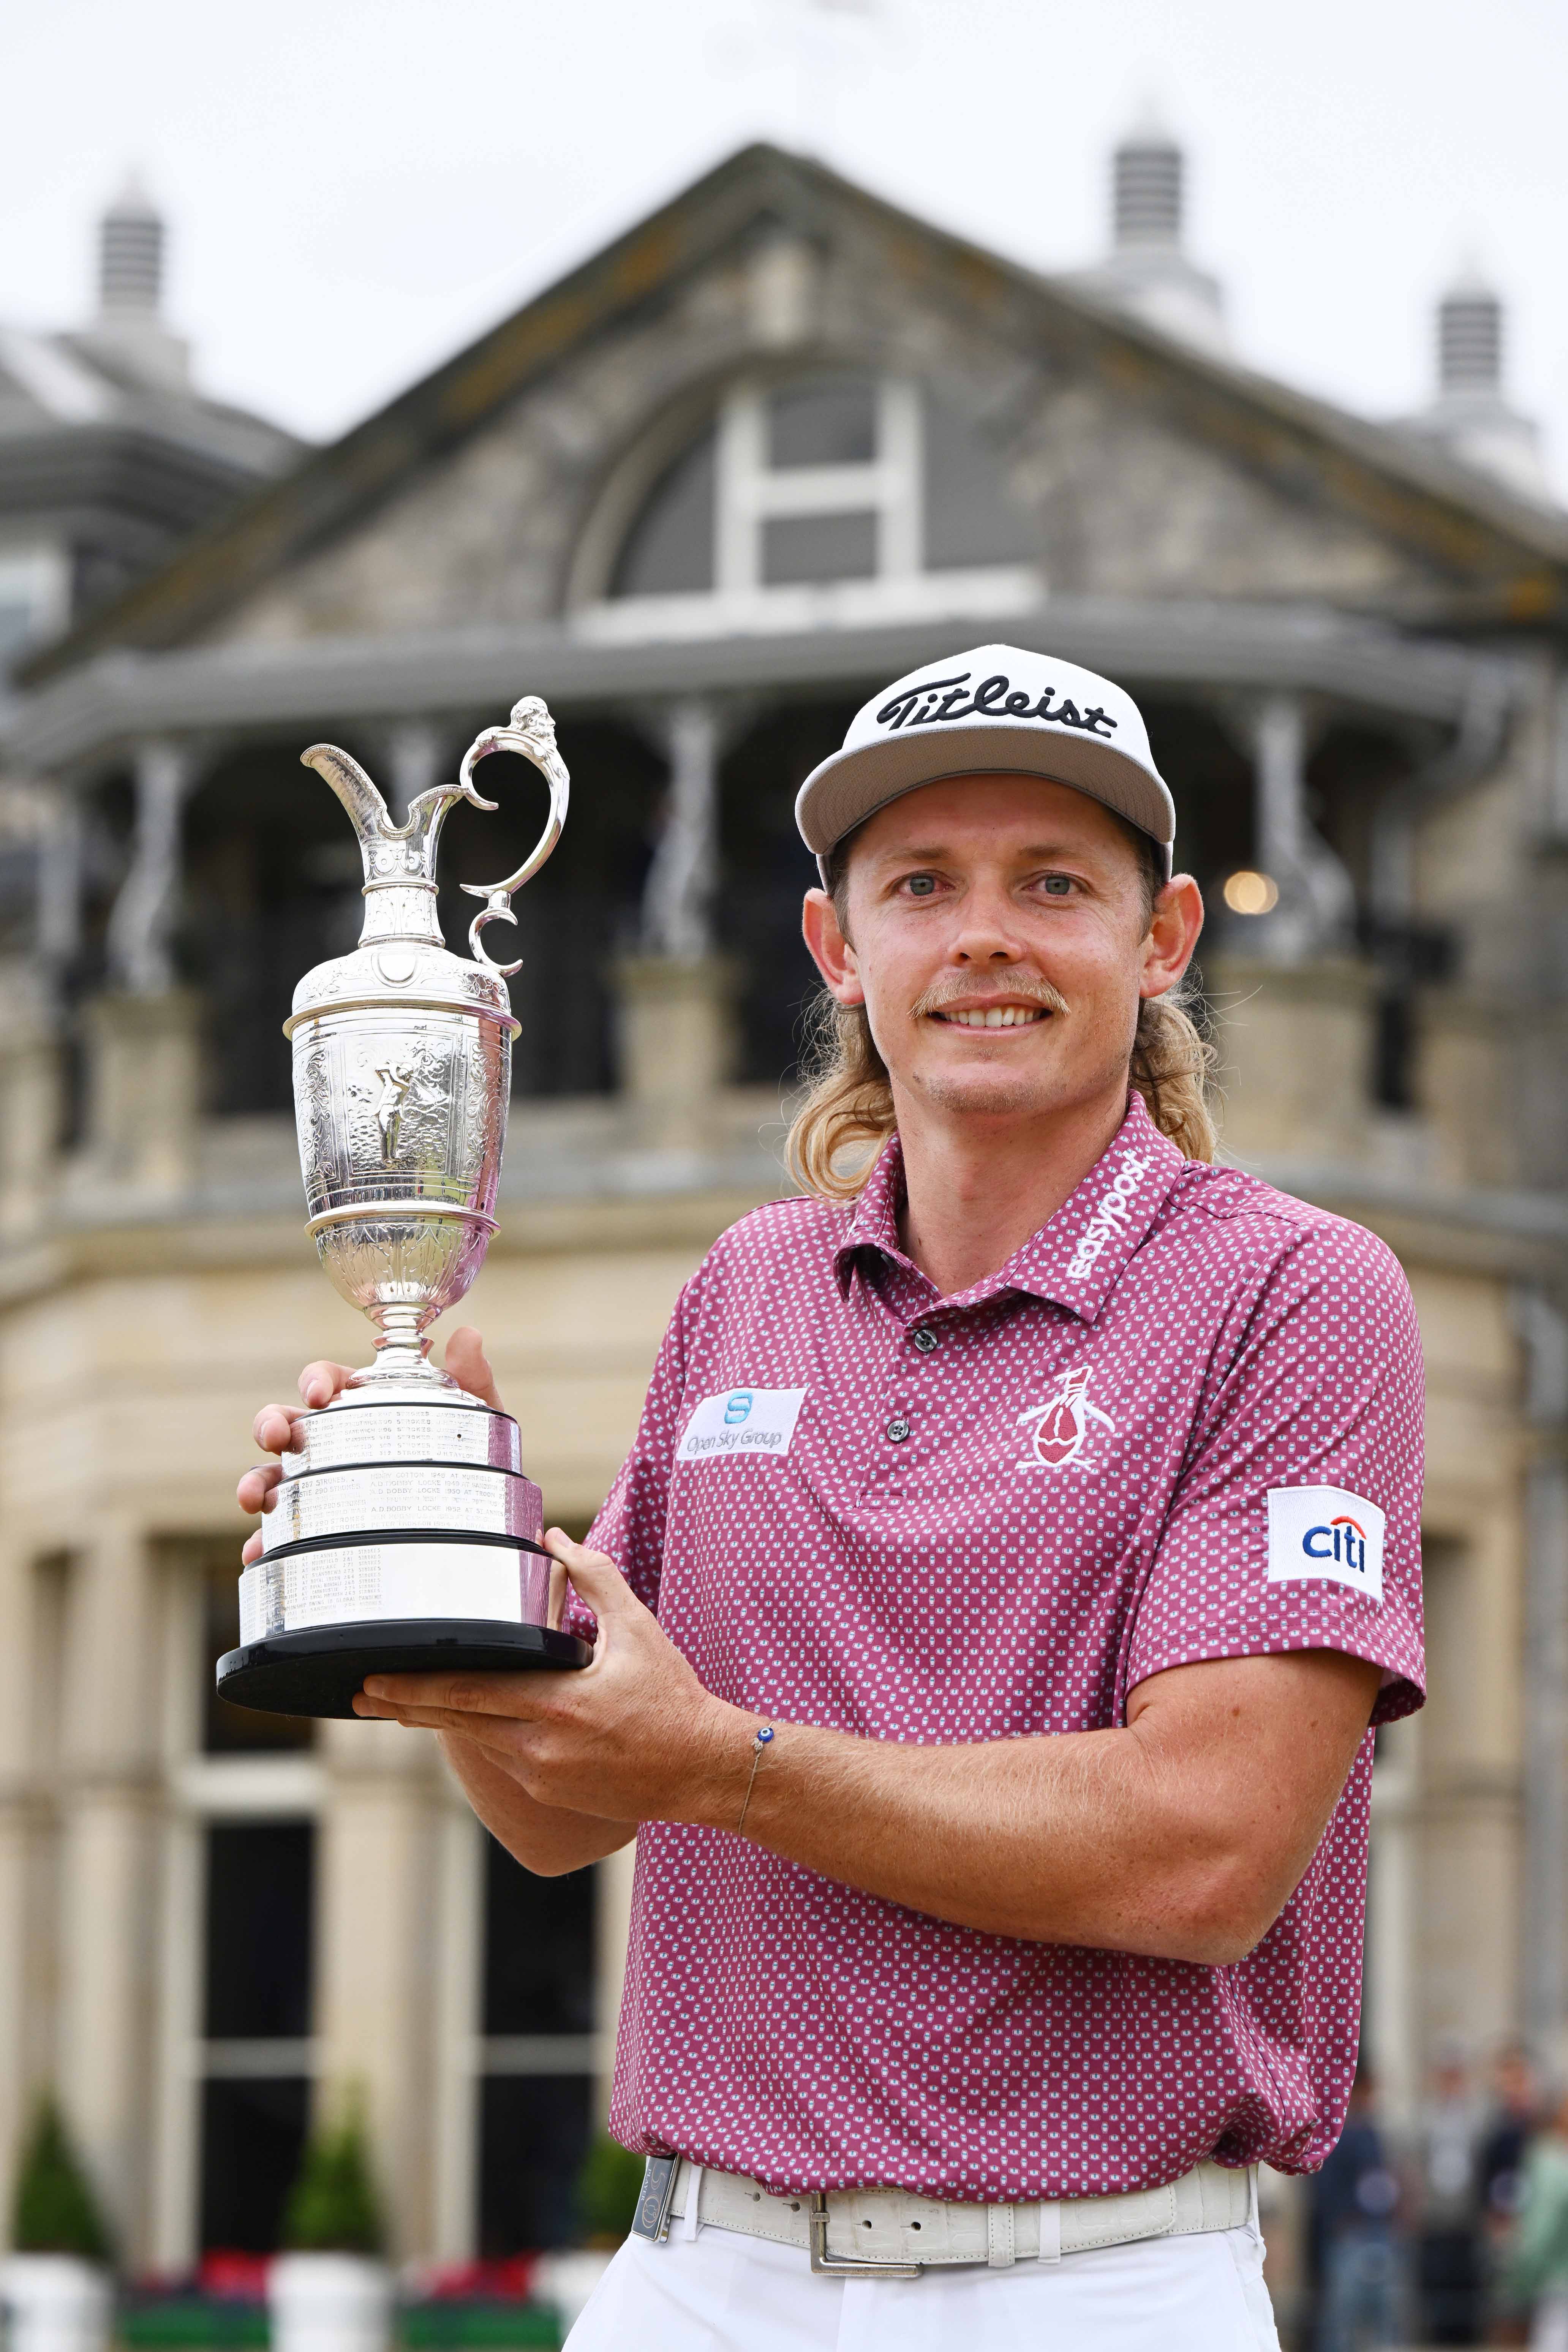 'The People's Champ' Aussie Cameron Smith Wins British Open